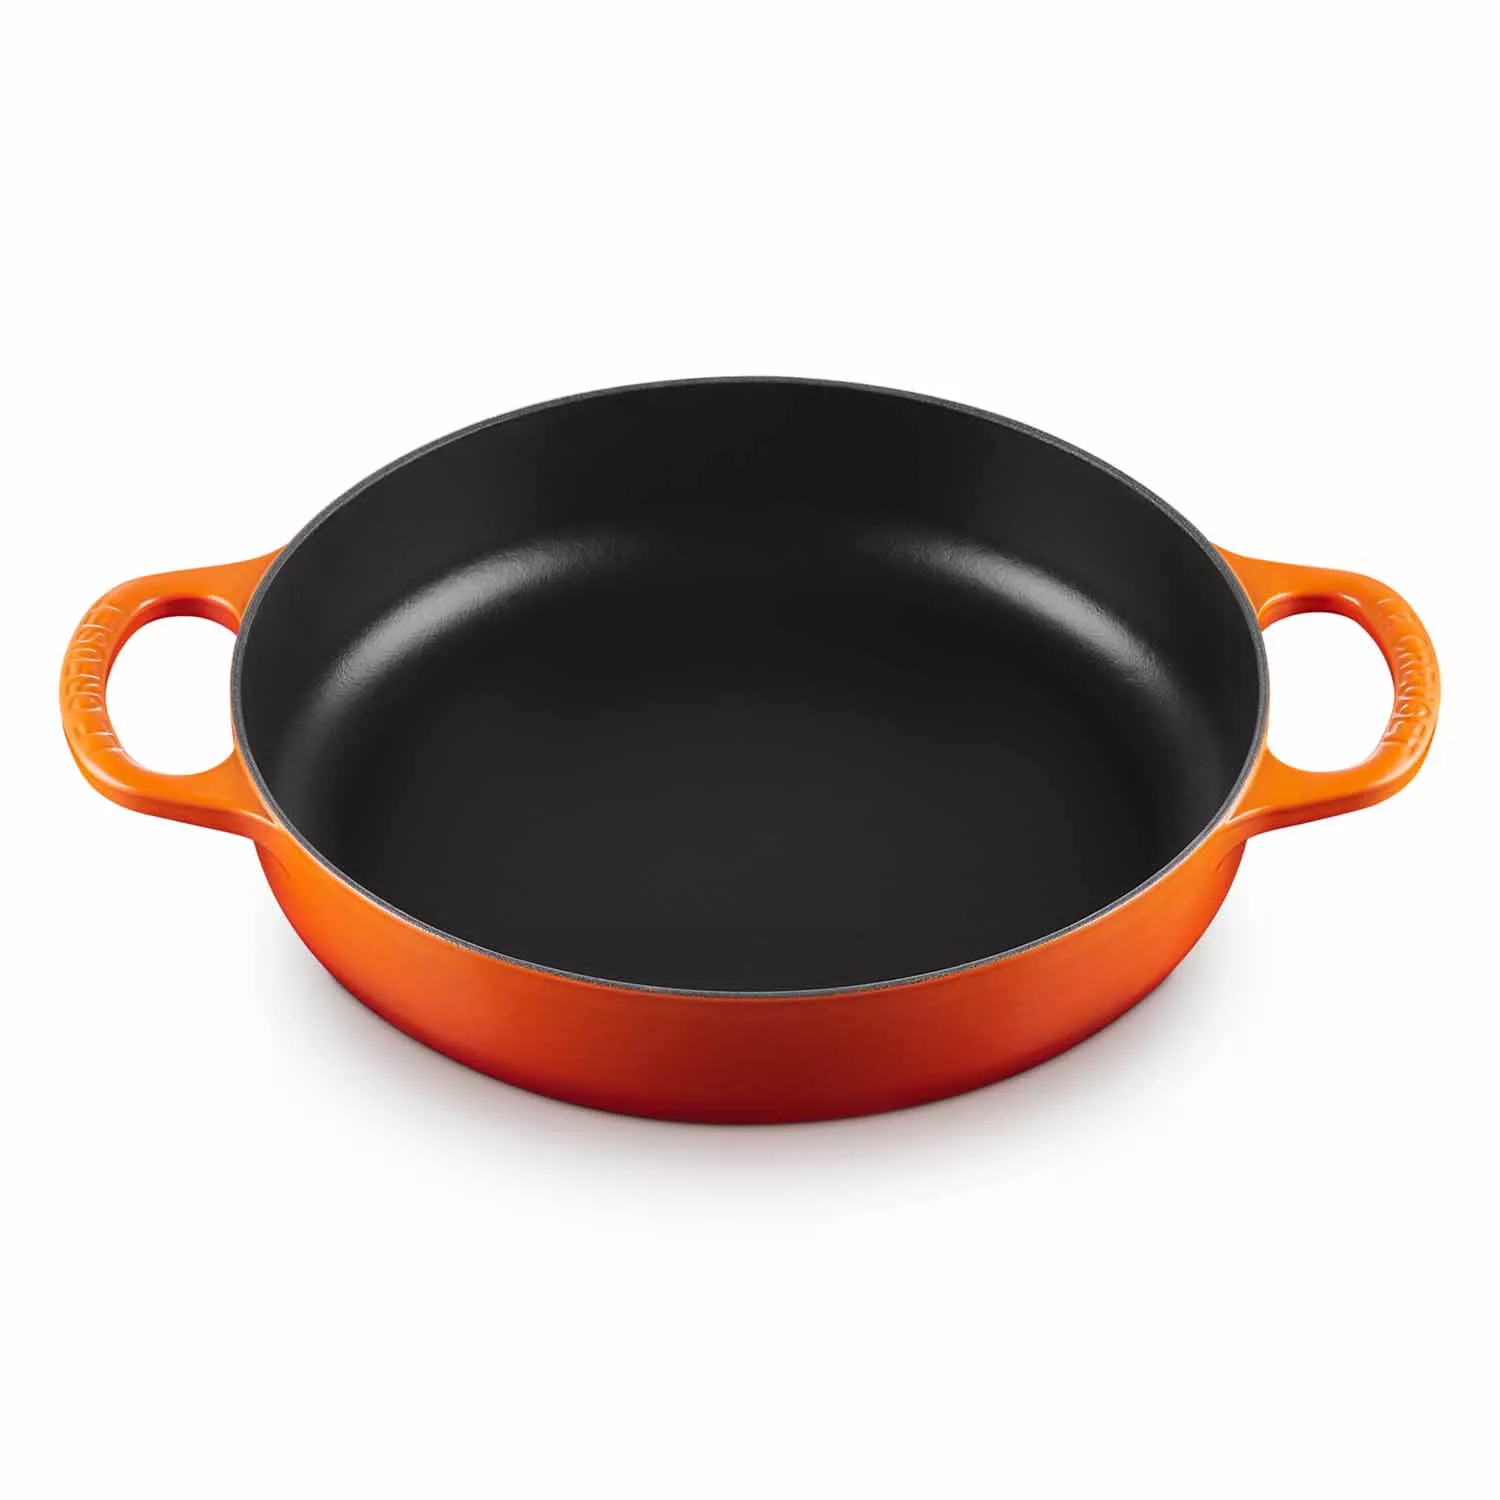 Le Creuset 11 Signature White Everyday Pan + Reviews